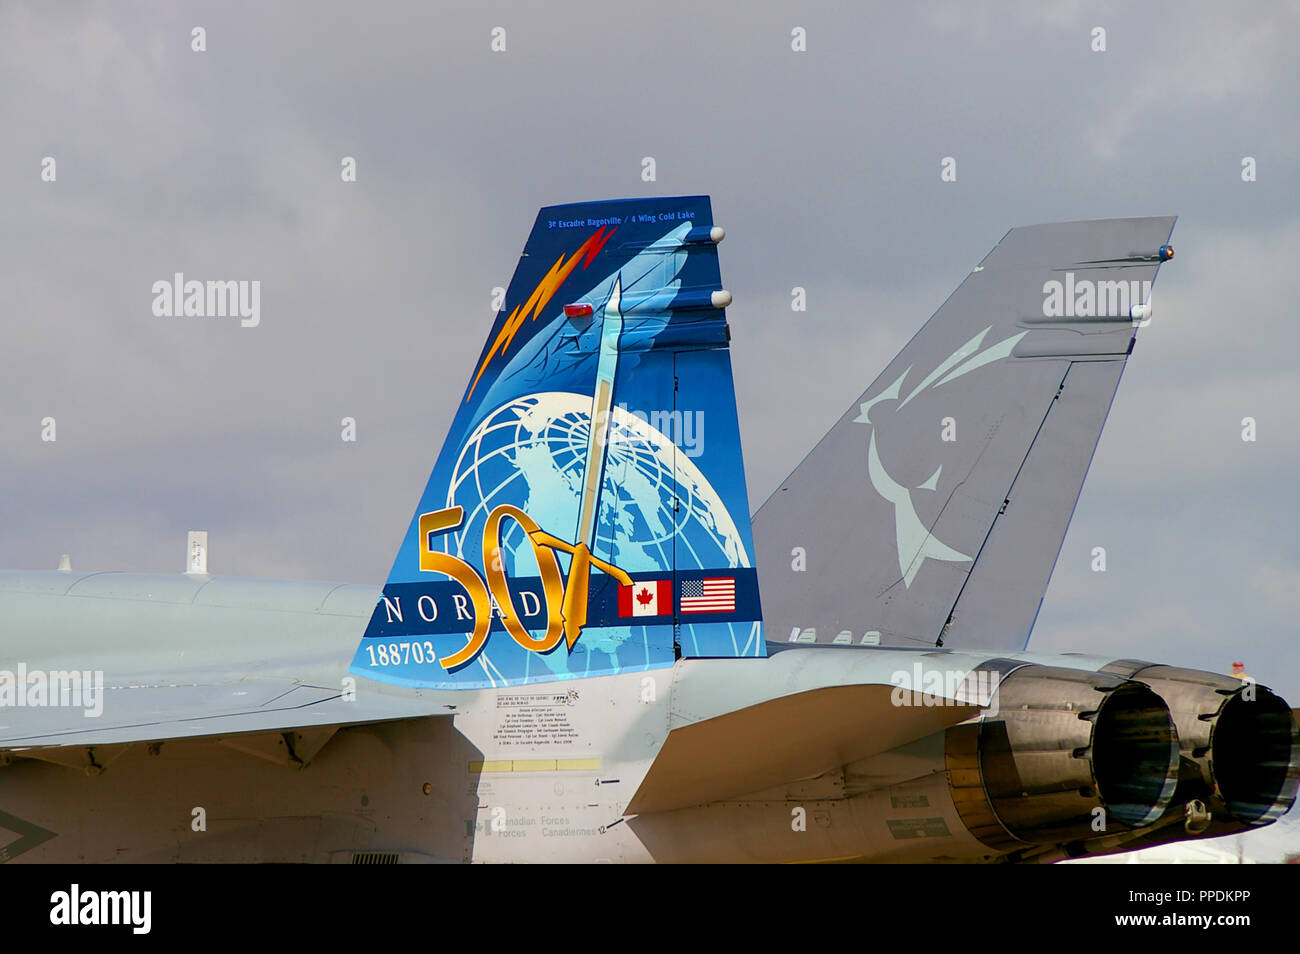 Royal Canadian Air Force, Canadian Armed Forces McDonnell Douglas CF-188A Hornet aus 4 Wing Cold Lake mit NORAD-Speziallackierung Stockfoto